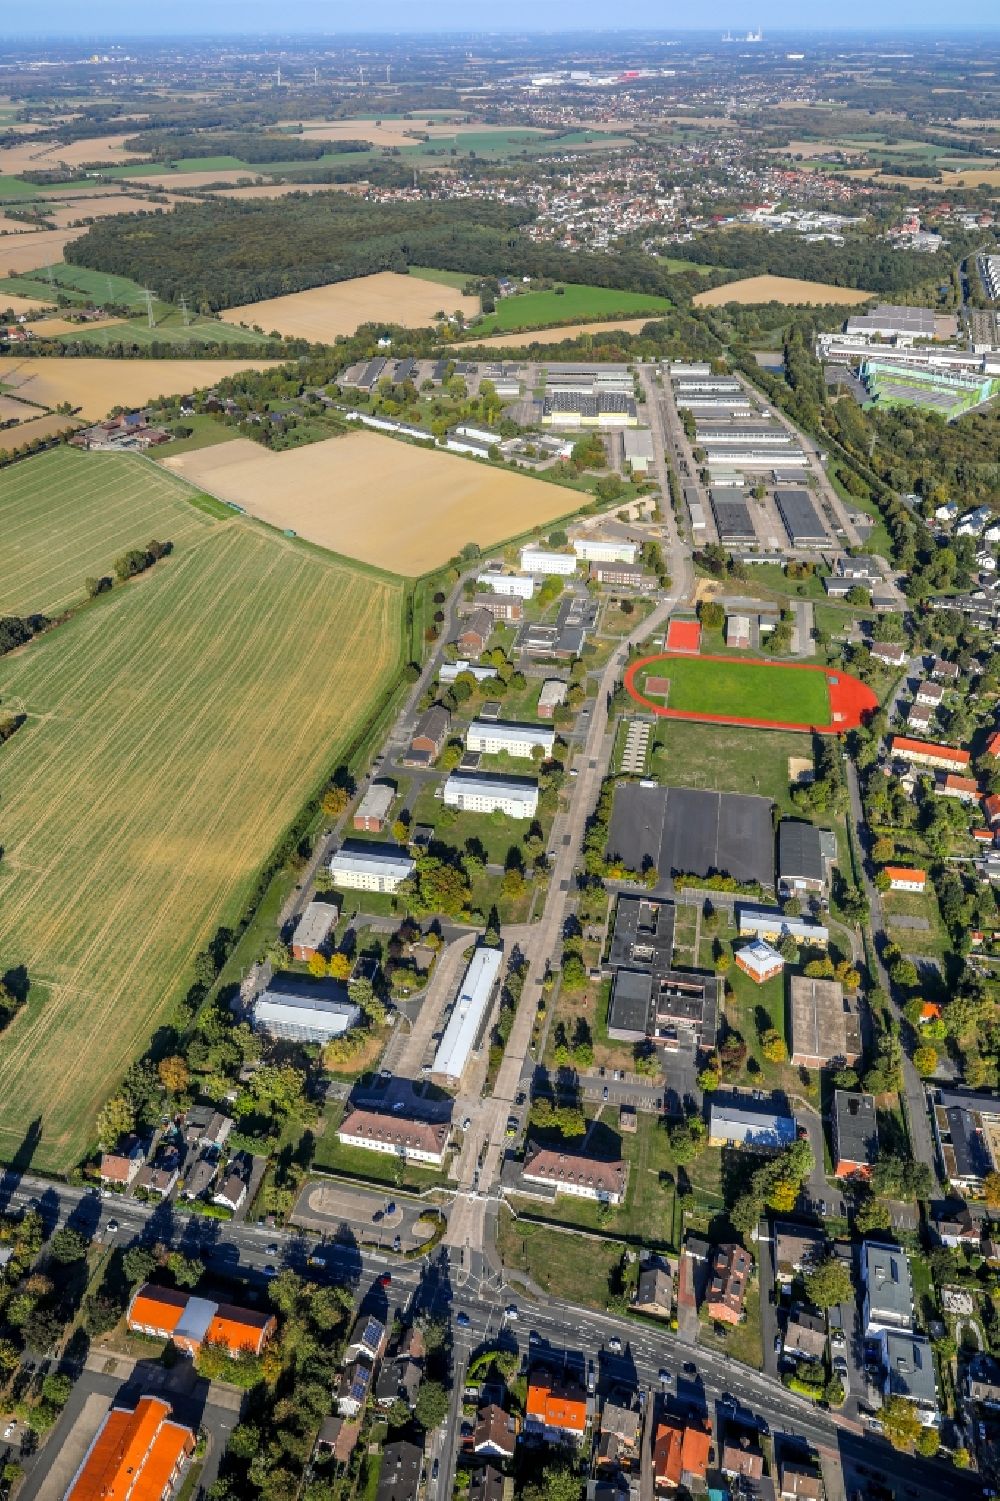 Unna from the bird's eye view: Building complex of the German army - Bundeswehr military barracks Glueckauf in Unna in the state North Rhine-Westphalia, Germany